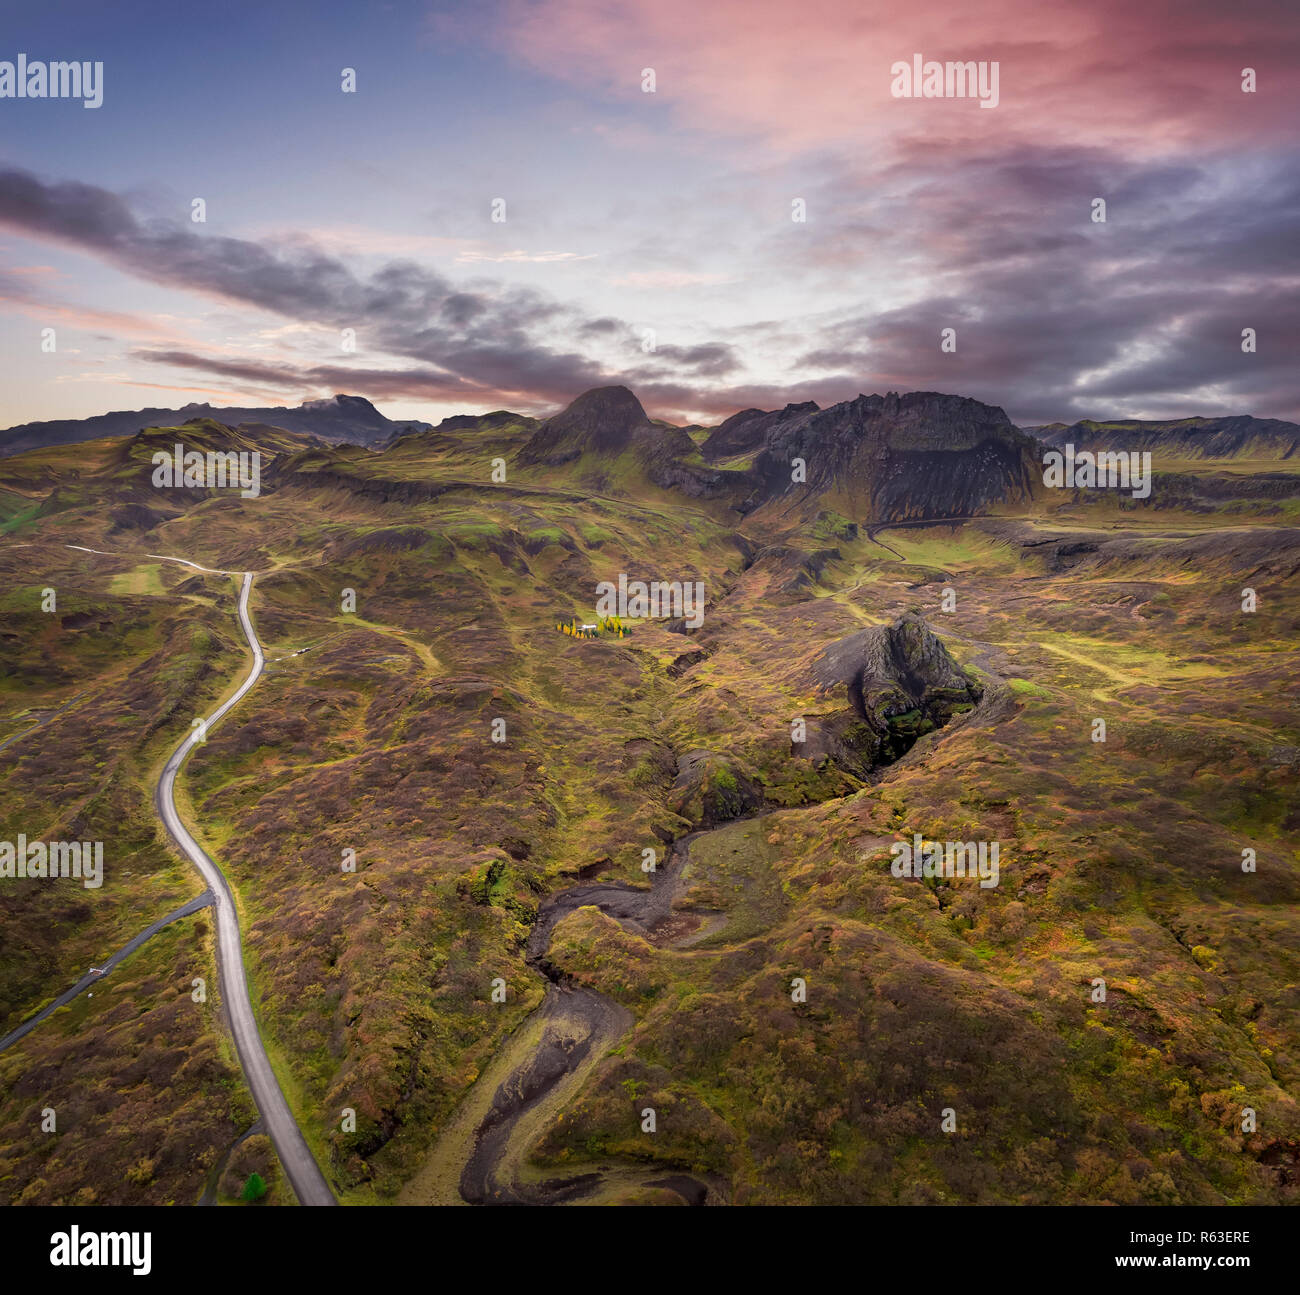 Thingvellir National Park, Iceland. This image is shot using a drone. Stock Photo